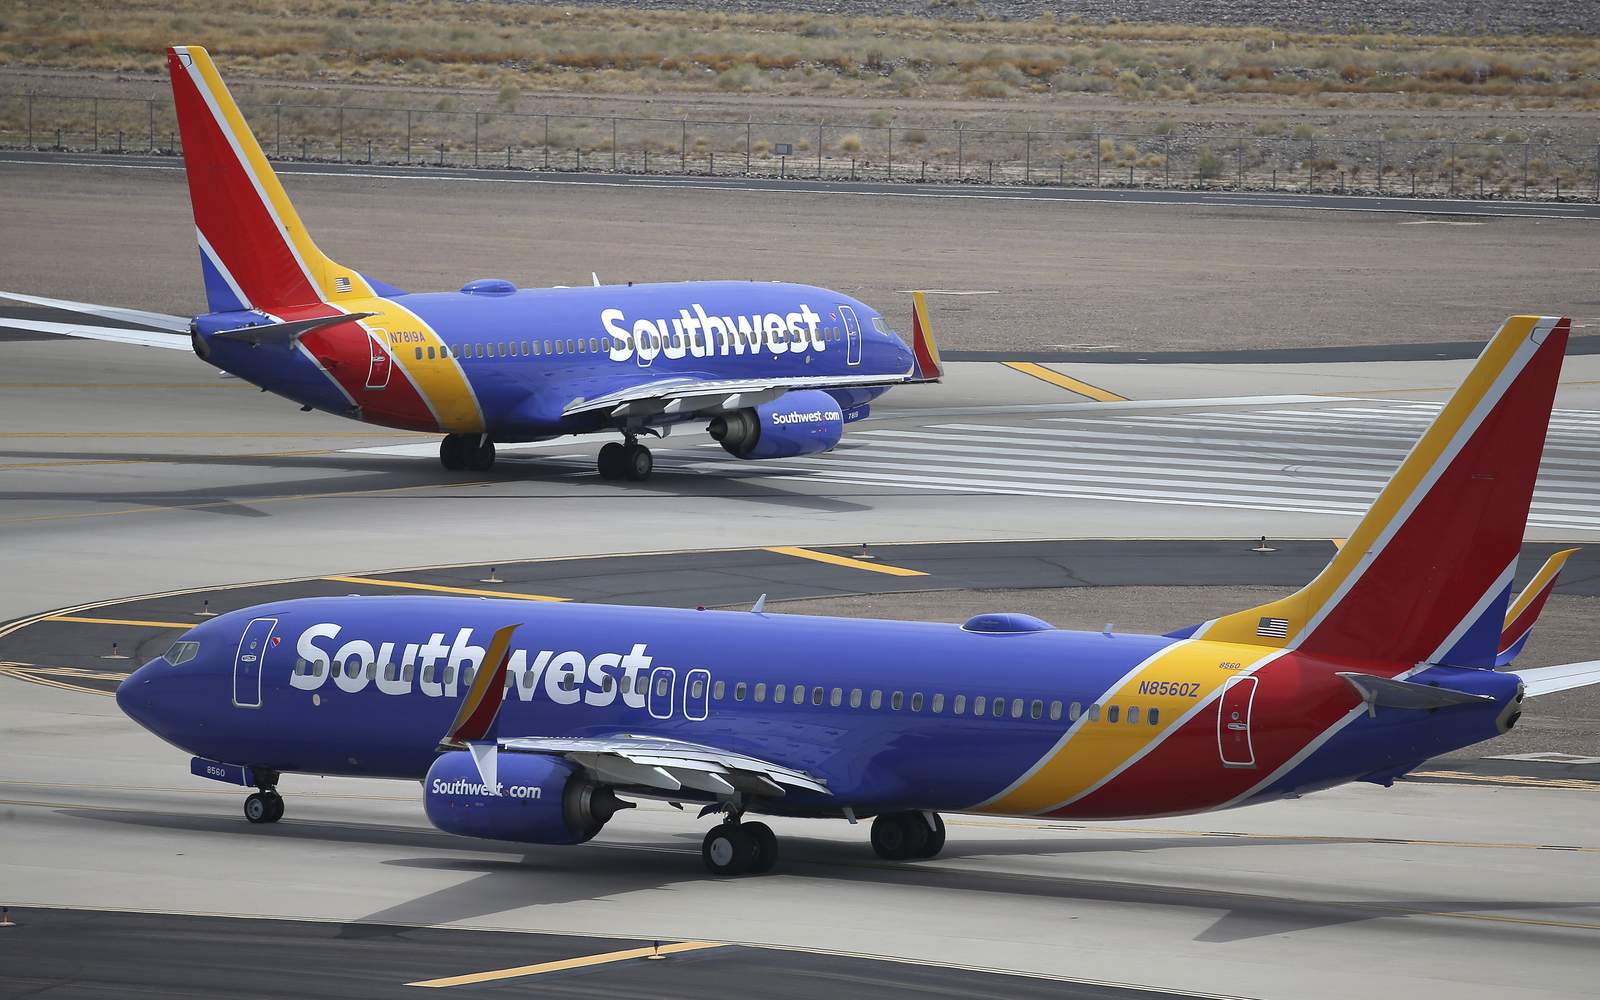 Southwest Airlines BOGO airfare deal is good through Sept. 24